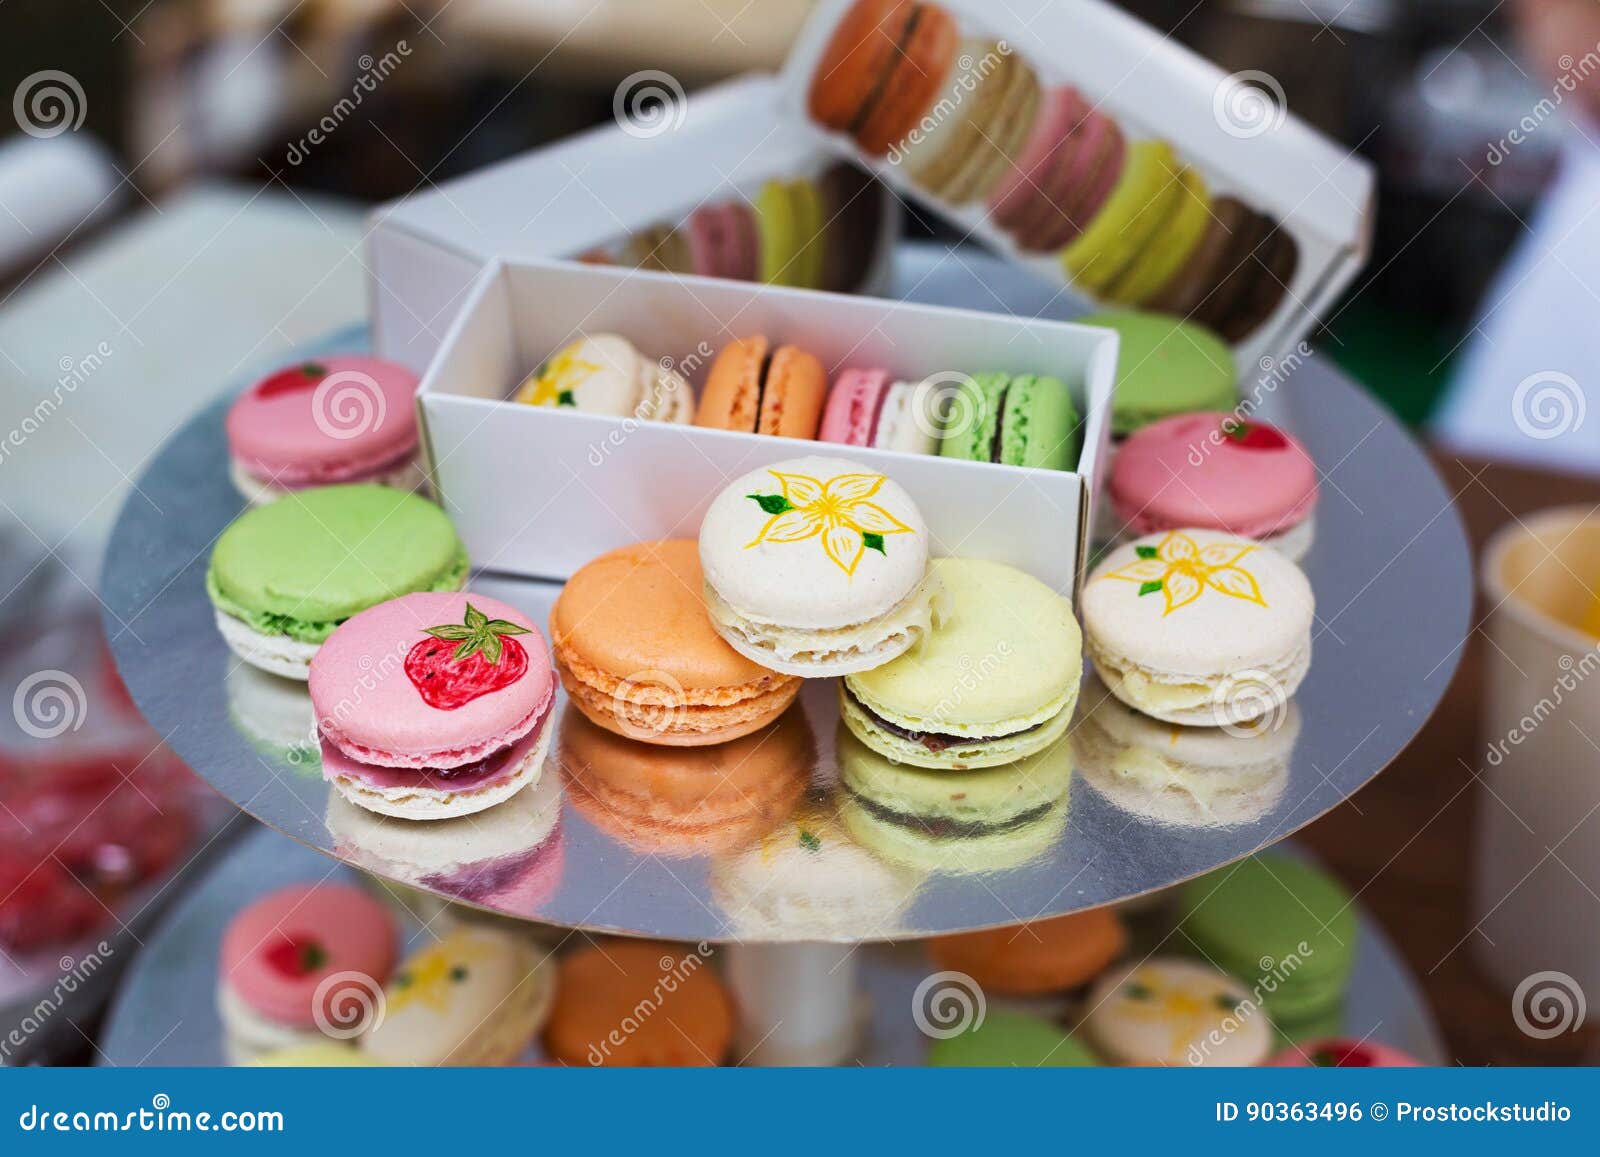 Colorful Macaron Cookies on Bar for Sale Stock Photo - Image of dessert ...